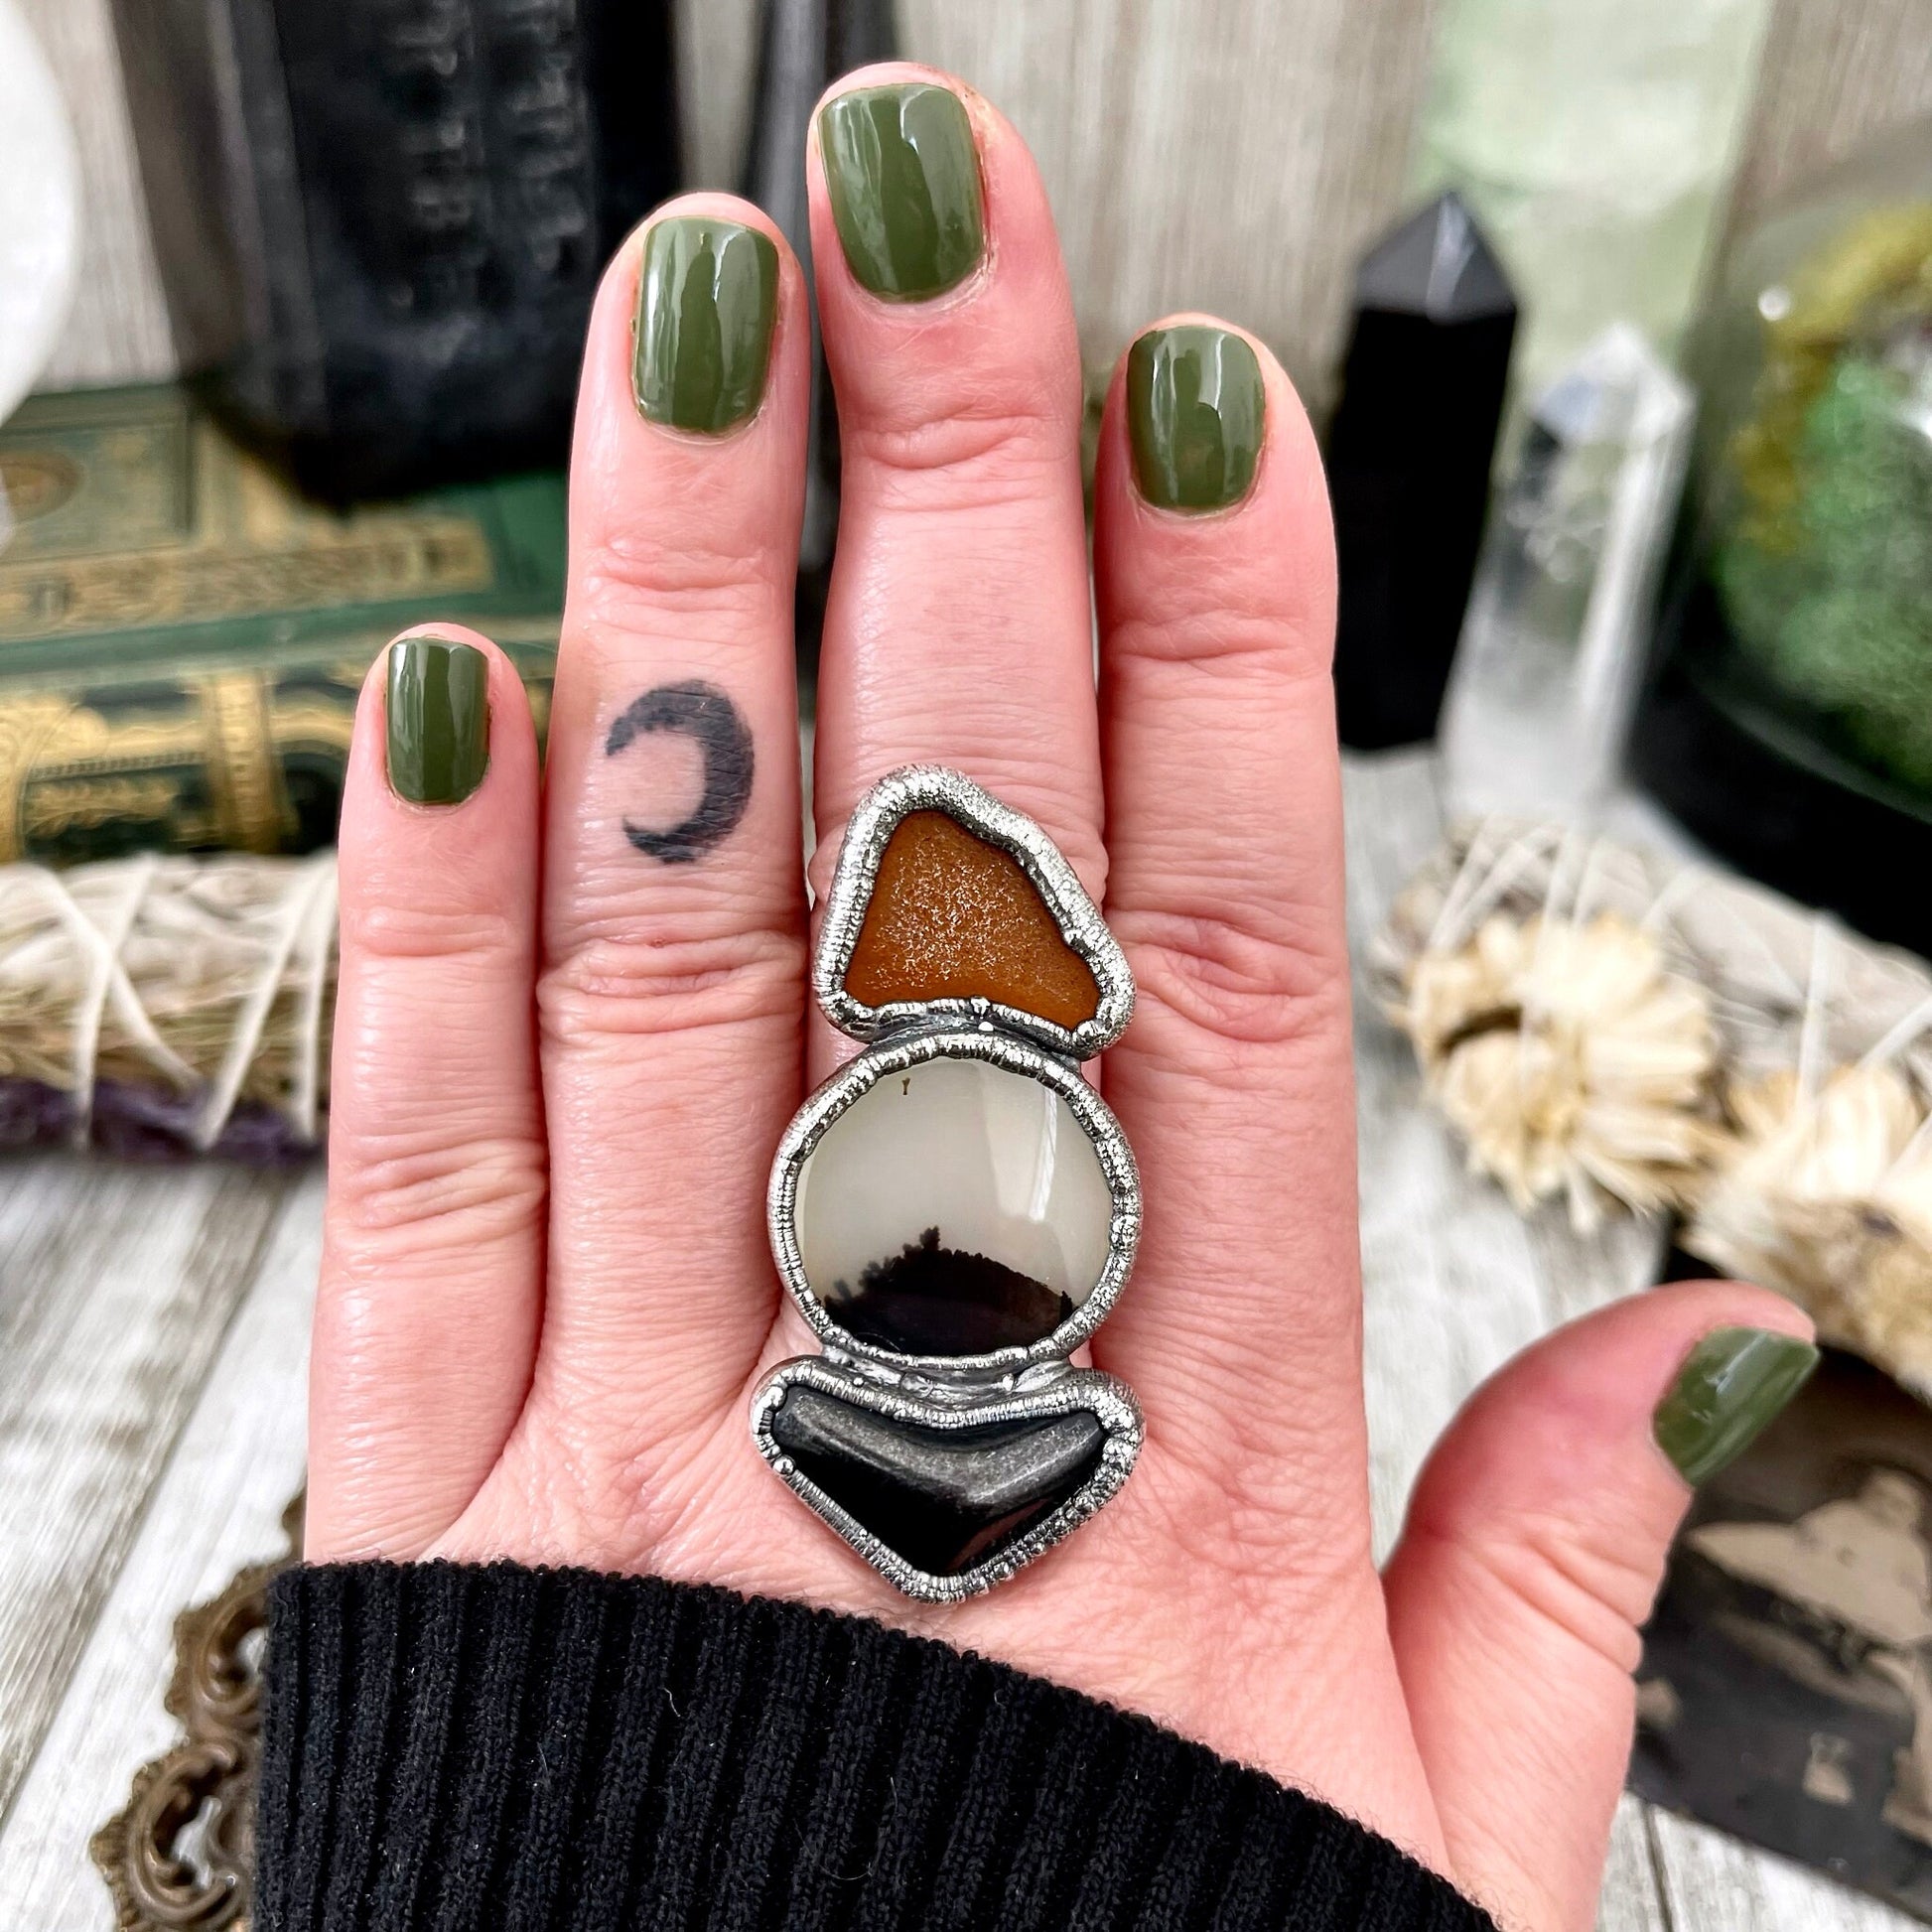 Size 8 Crystal Ring - Three Stone Ring Montana Moss Agate Black Onyx Sea Glass Silver Ring / Foxlark Collection - One of a Kind Jewelry